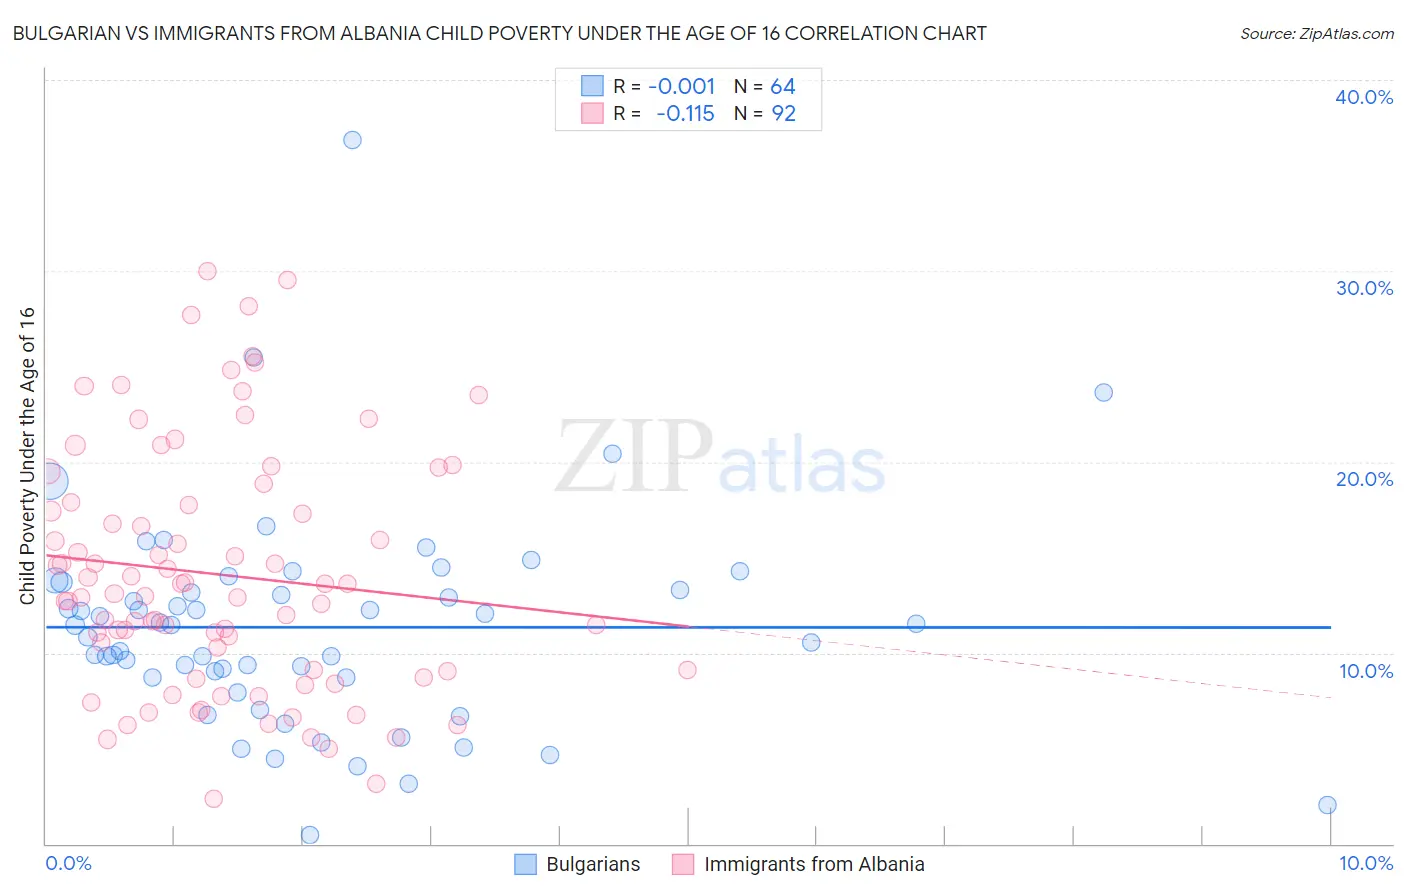 Bulgarian vs Immigrants from Albania Child Poverty Under the Age of 16